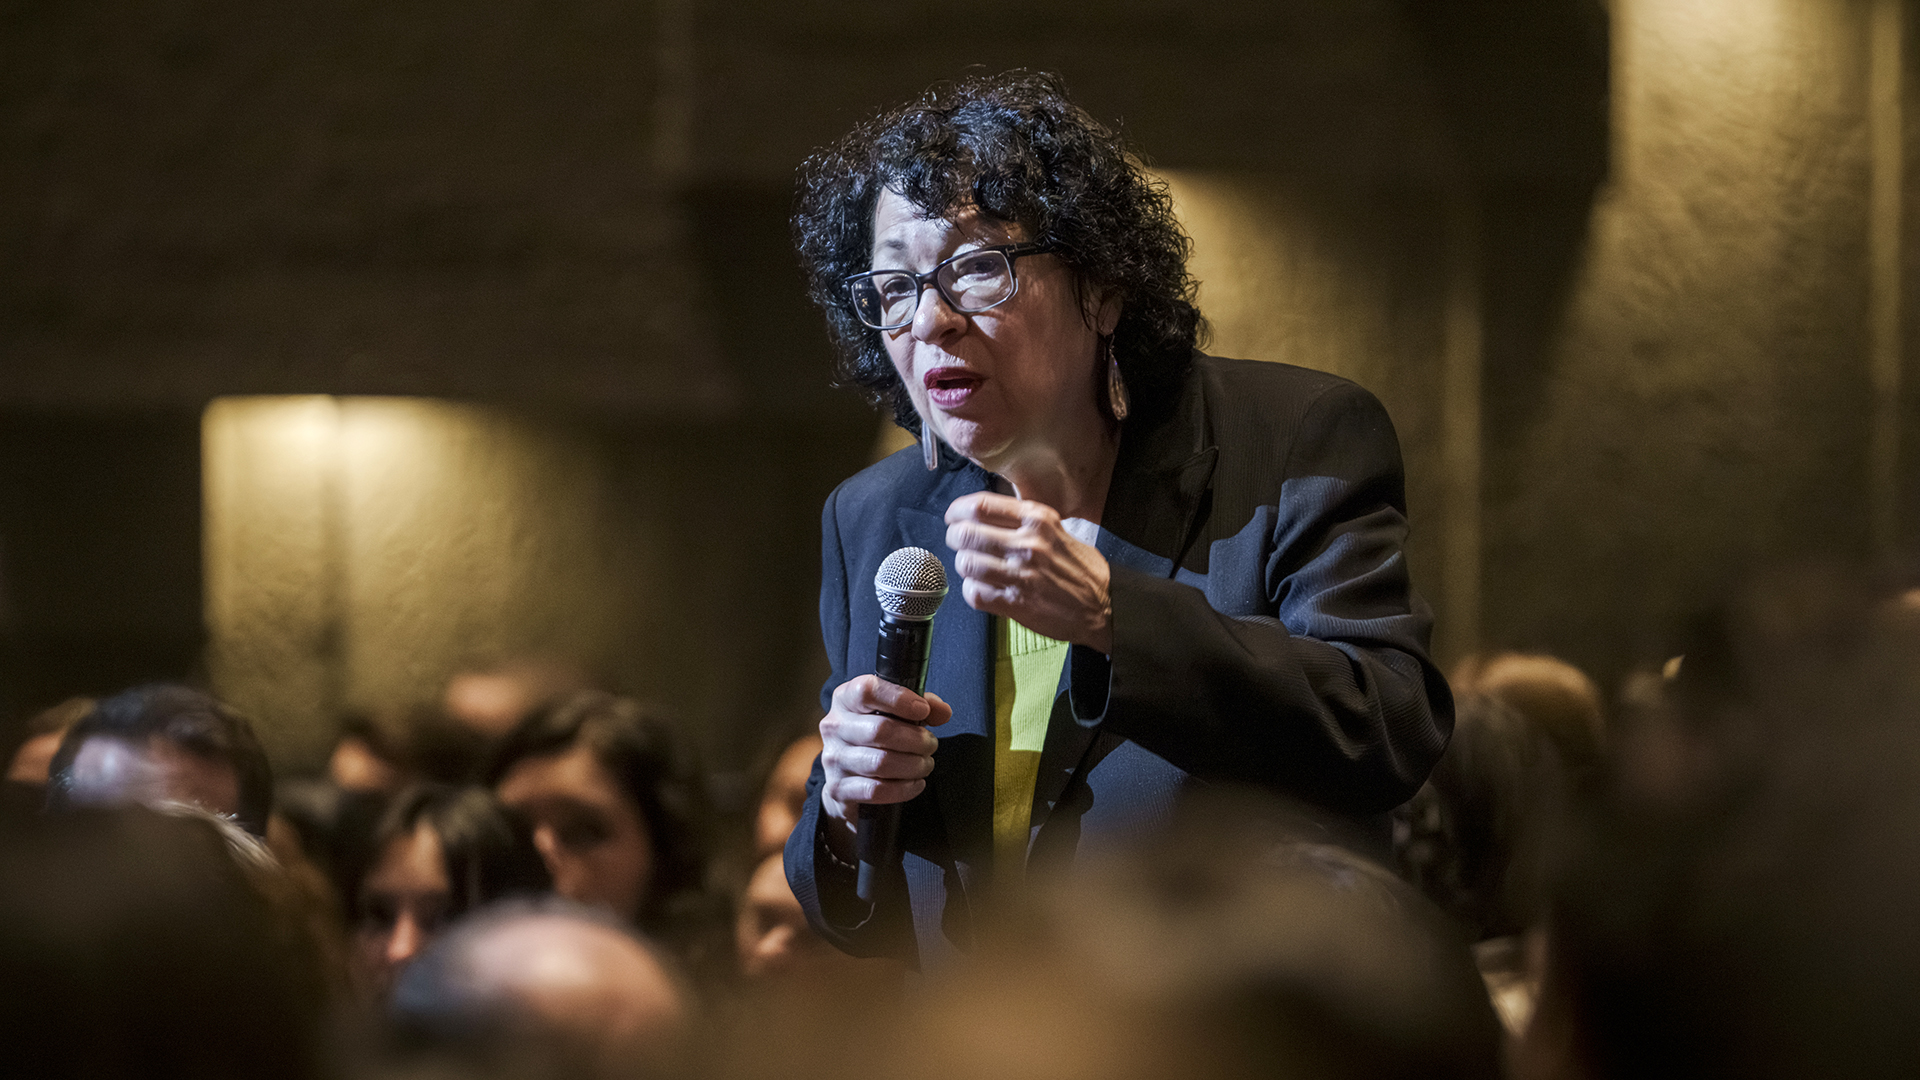 Sonia Sotomayor stands among audience members sitting in an auditorium while giving a lecture